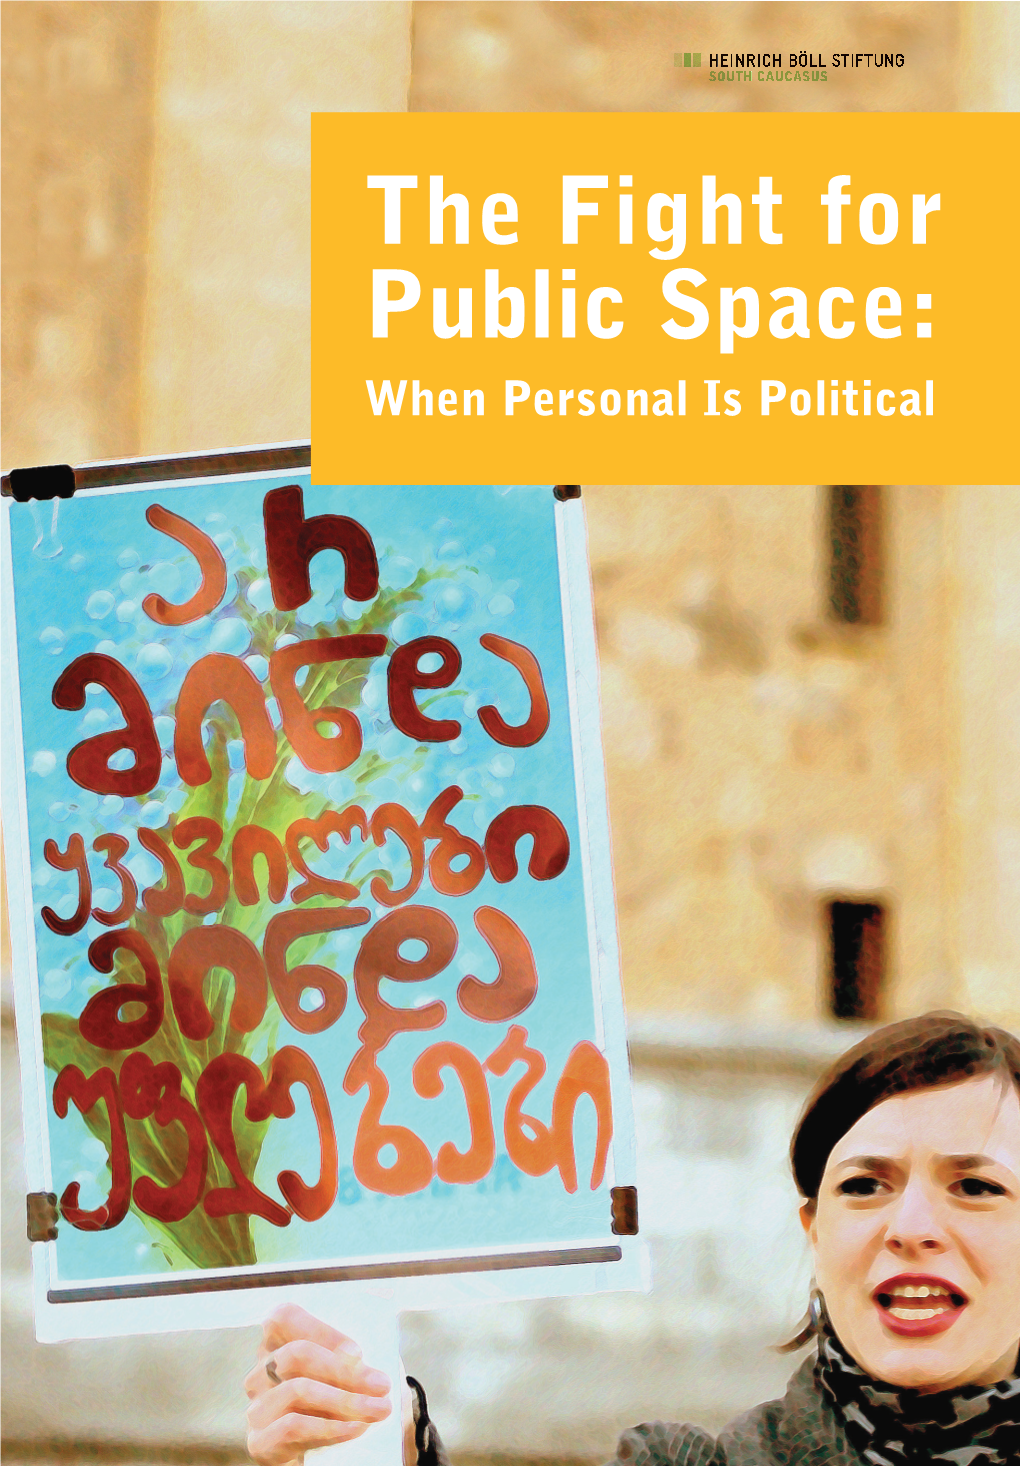 The Fight for Public Space: When Personal Is Political